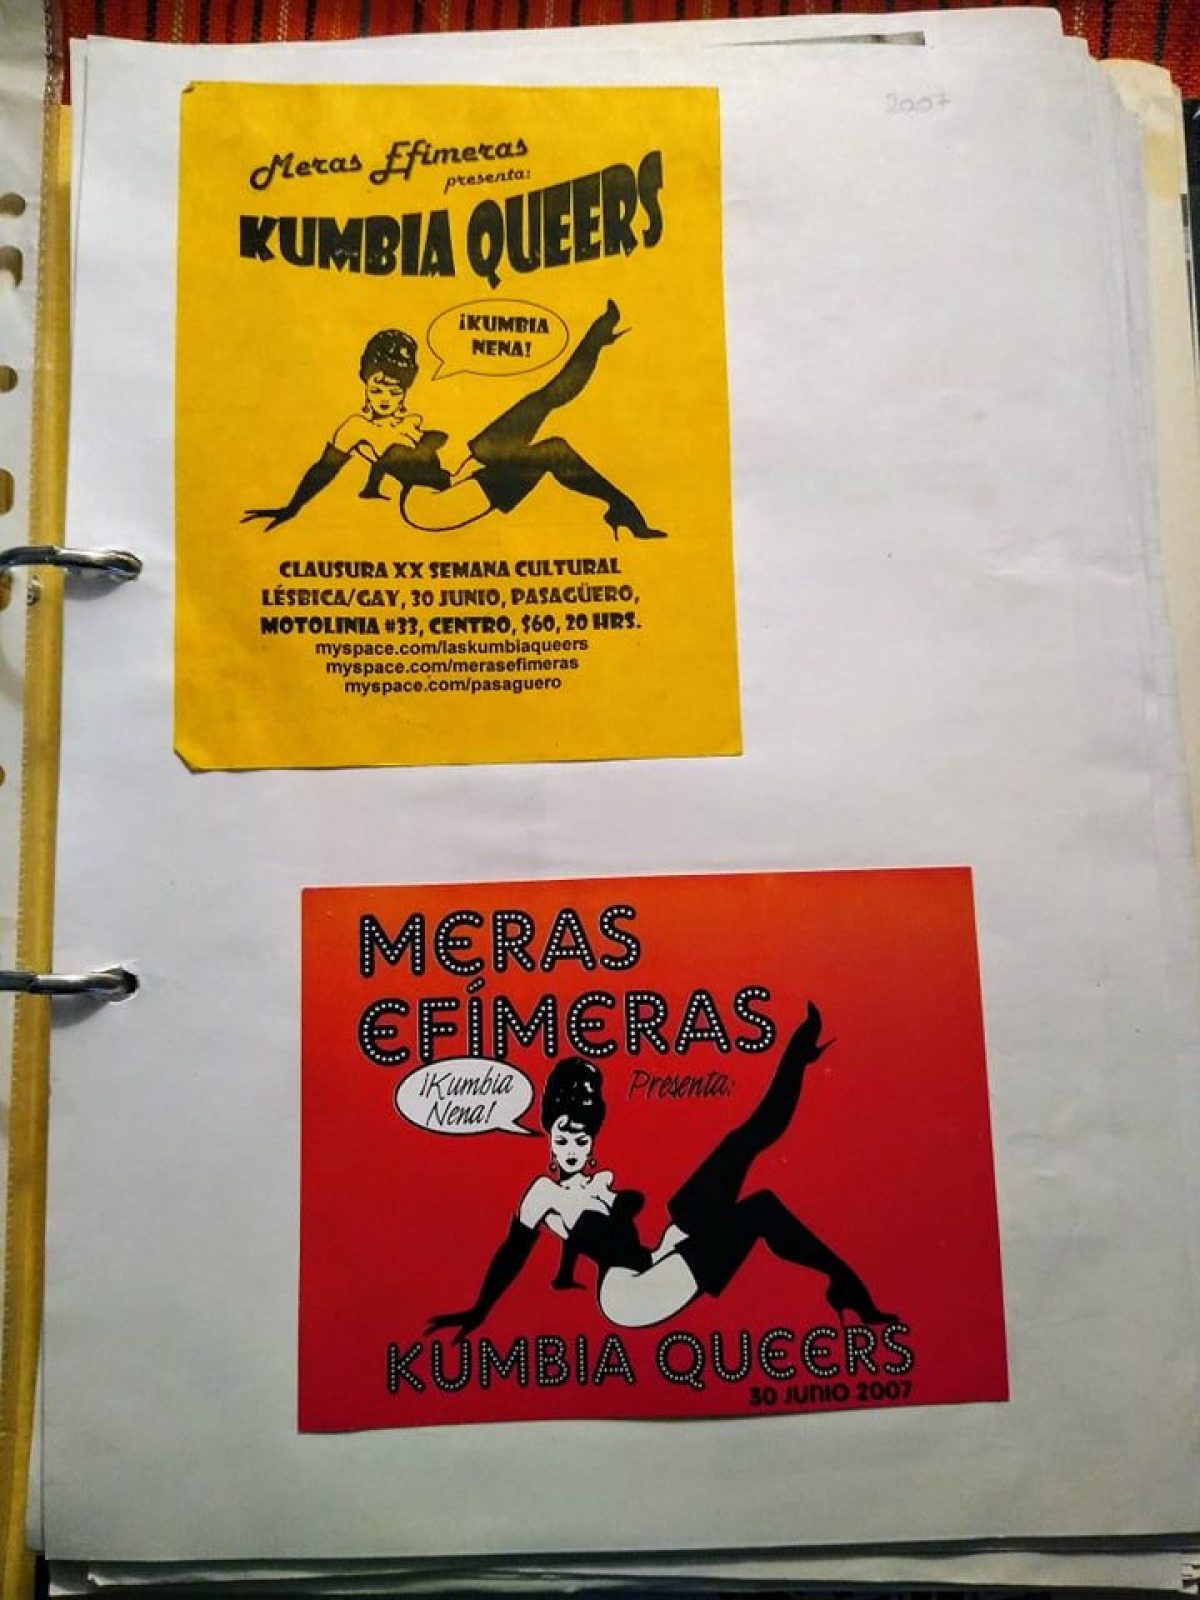 The photo shows a page from a scrapbook. The paper has two flyers glued to it. They are for the same party: Burlesquimeras presents Kumbia Queers for the first time in Mexico.